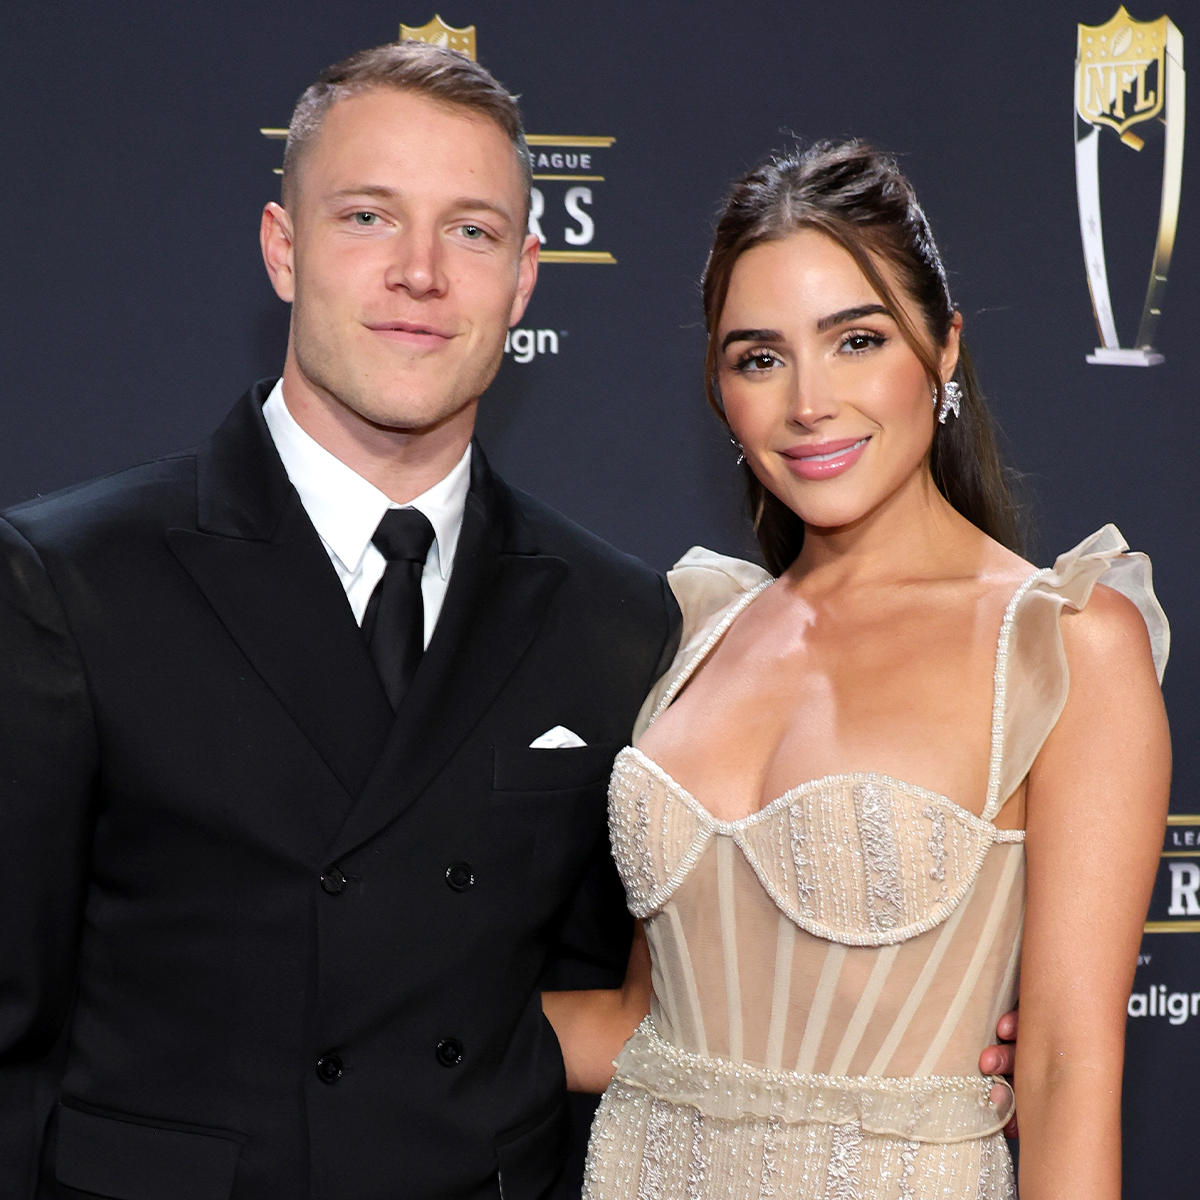 Olivia Culpo Shares What She Values Most About Christian McCaffrey